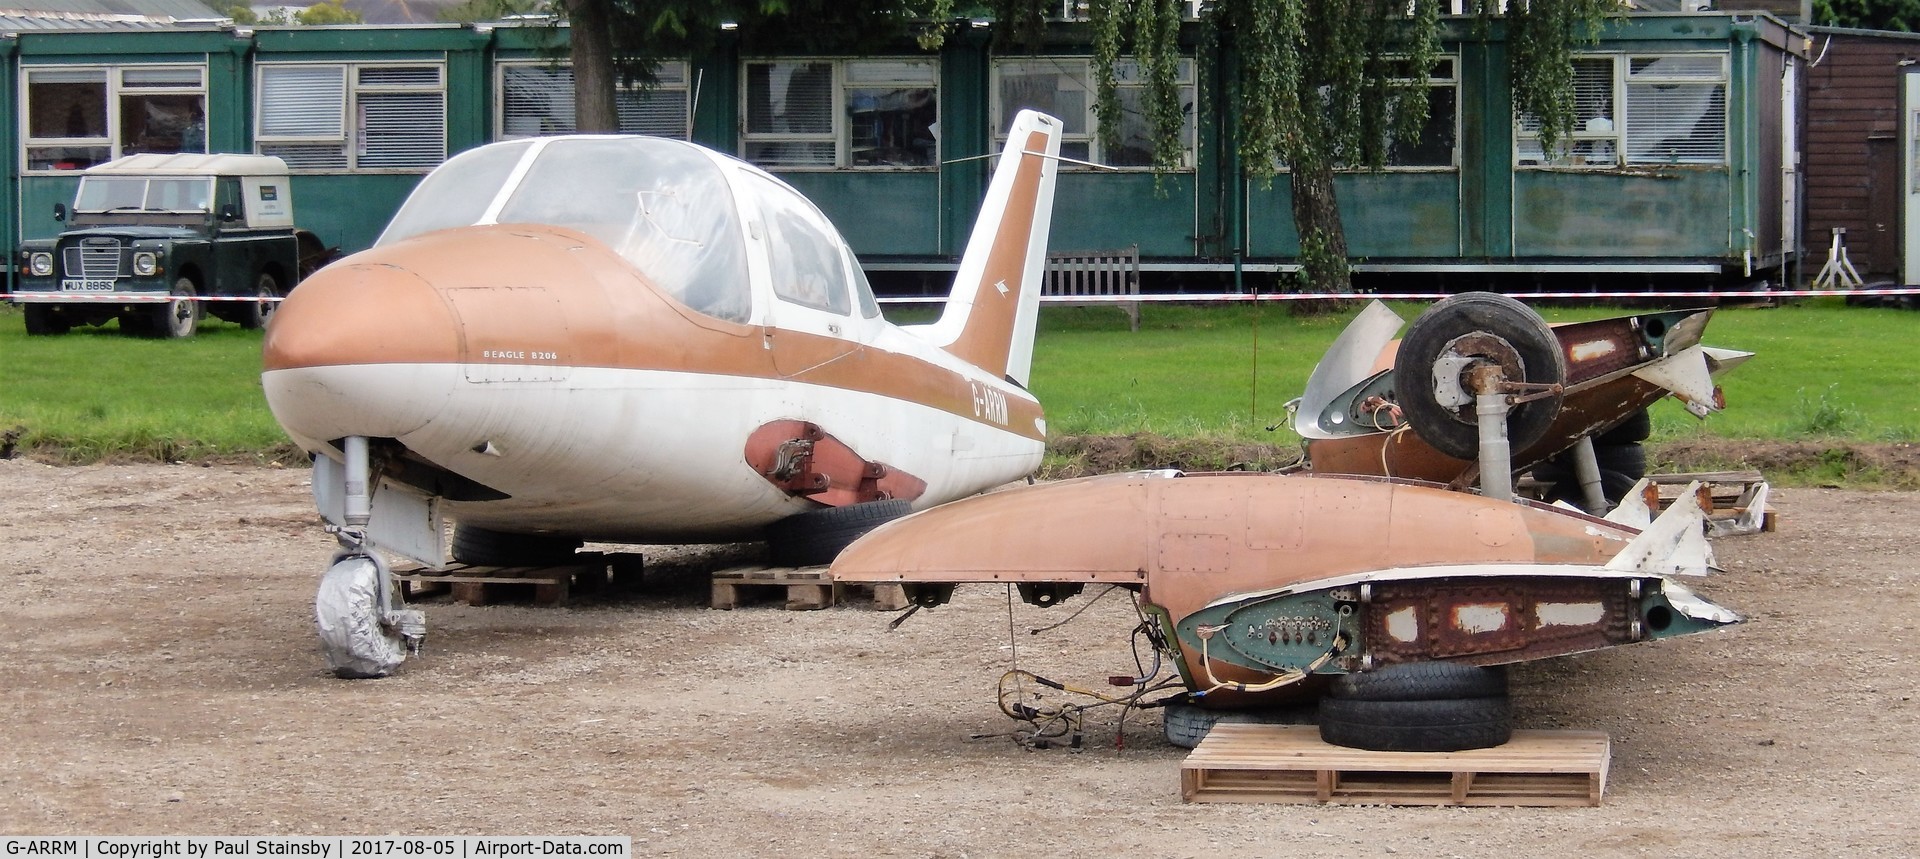 G-ARRM, 1961 Beagle B-206X C/N B001, Moved to Brooklands Museum 4th August 2017